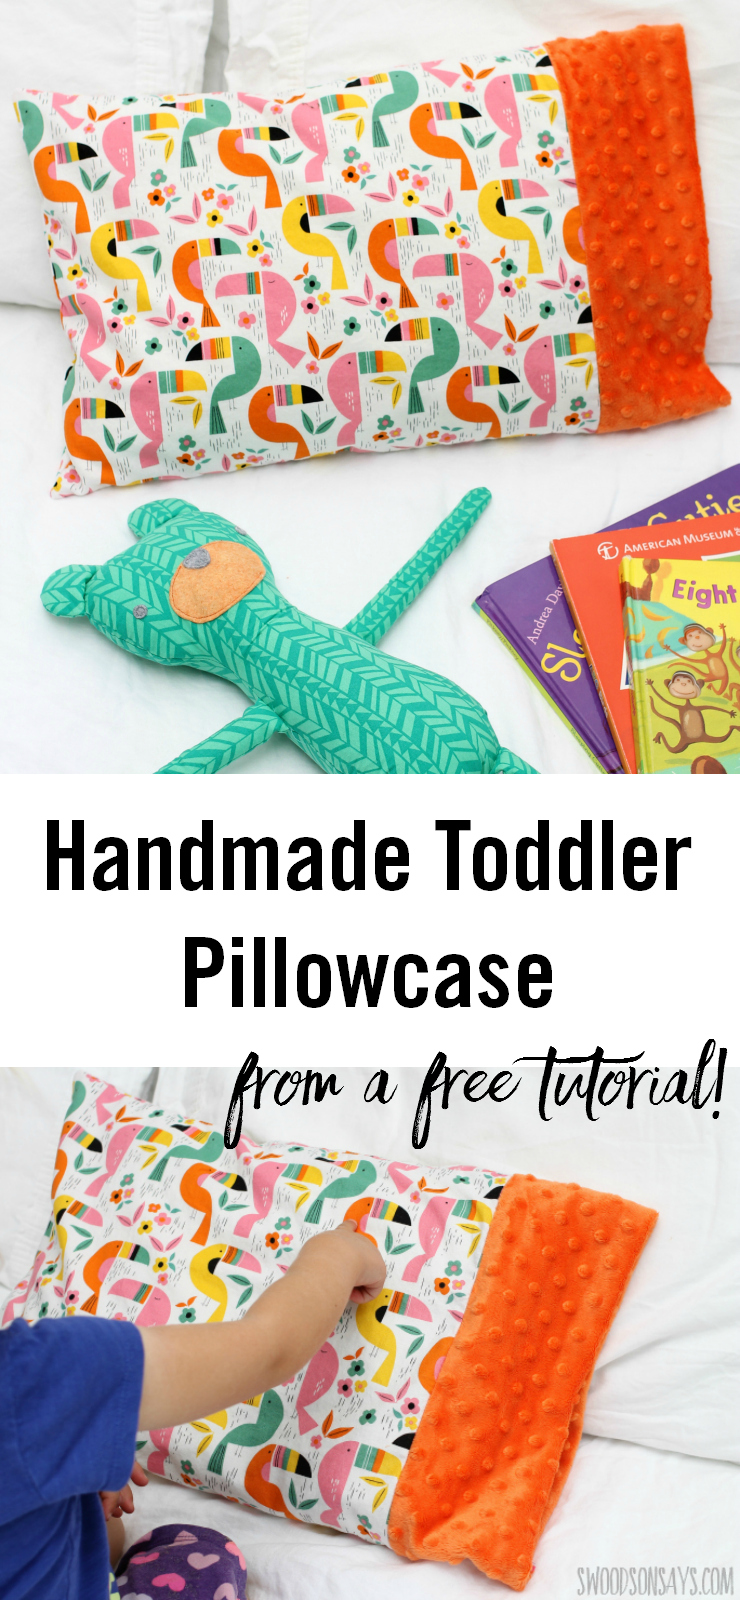 See how I used a free toddler pillow case pattern from Coral + Co. to make the cutest minky edged pillow! Perfect for little kids or as a travel pillowcase to sew, this is a quick and easy sewing project perfect for beginners or using up minky scraps.